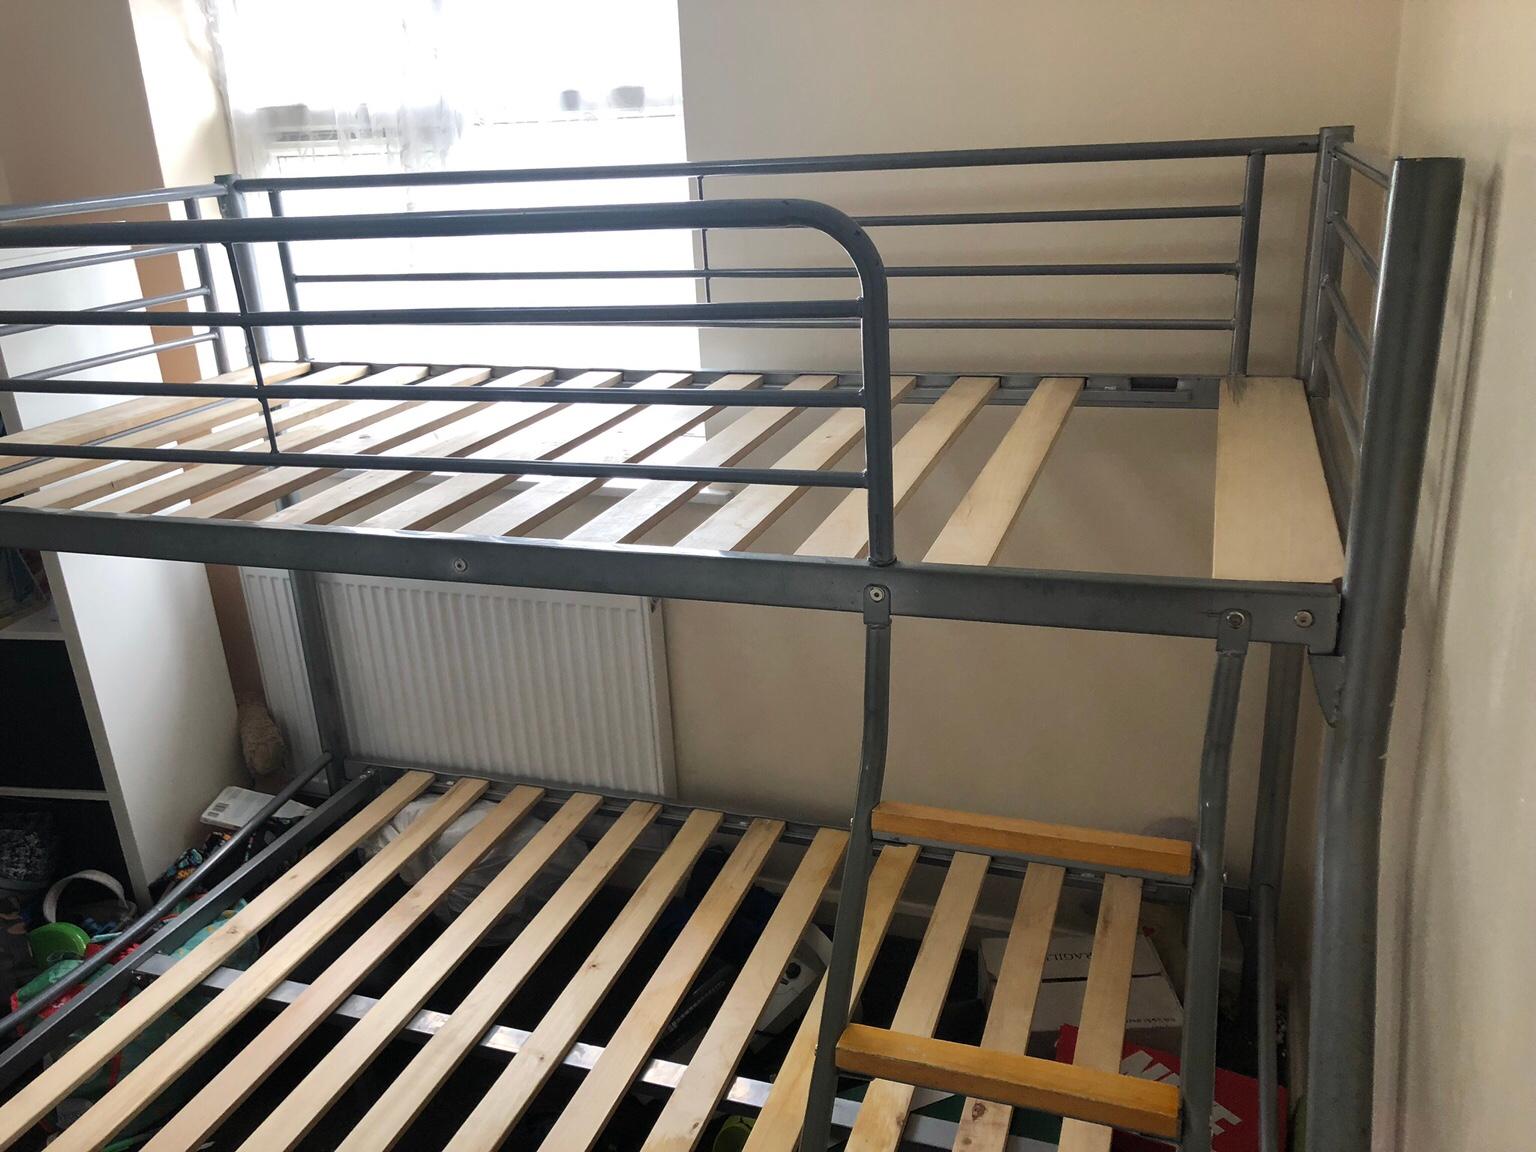 Bunk Bed And Tv Stand In London Borough, Bunk Bed With Tv Stand